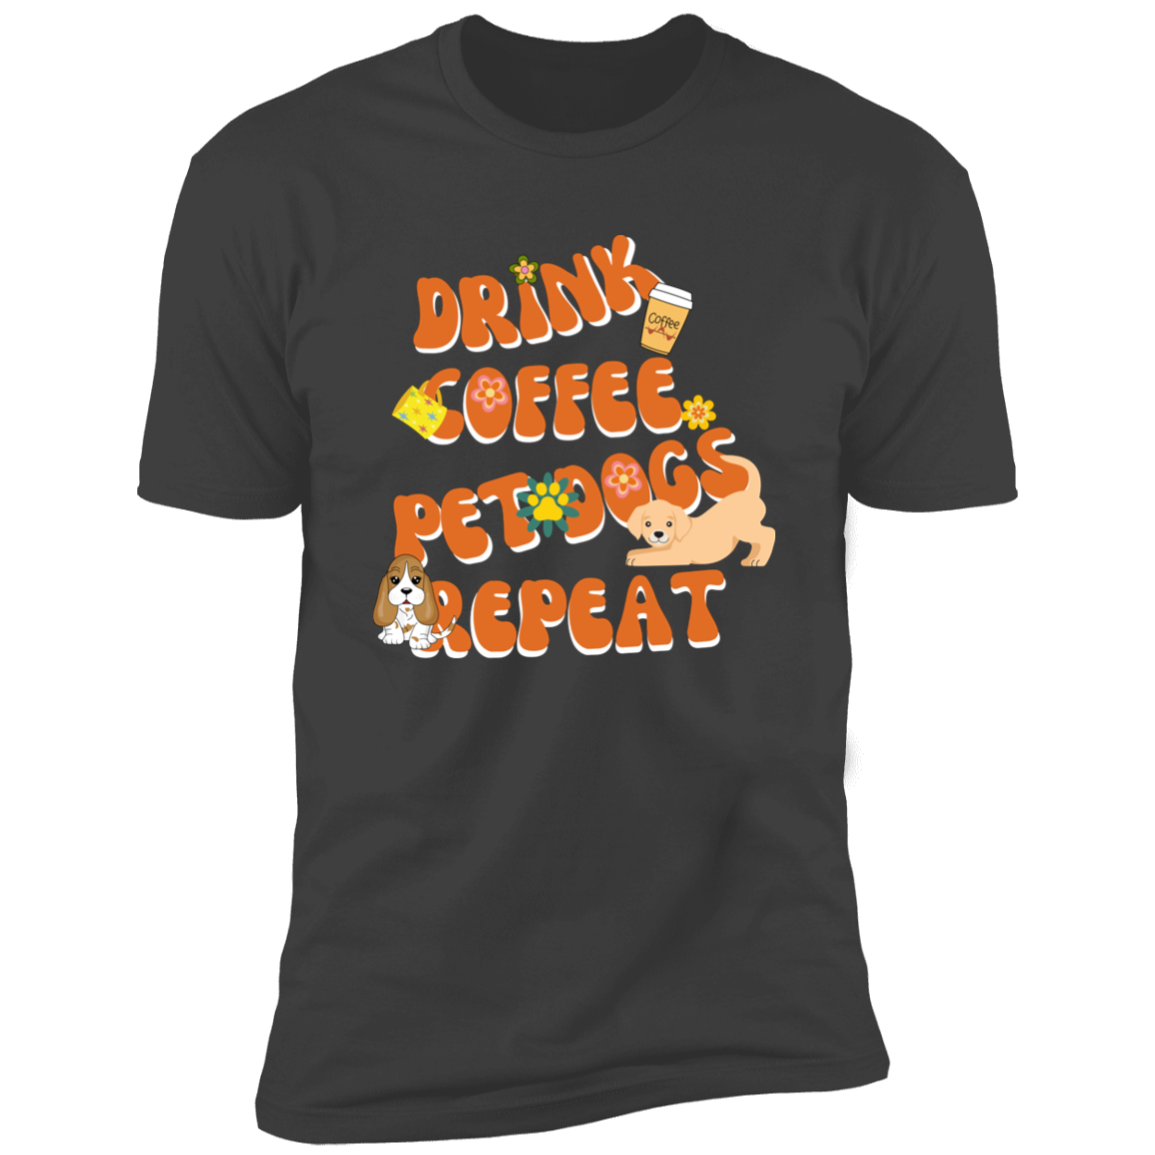 Drink Coffee Pet dogs repeat dog  Shirt, funny dog shirt for humans, dog mom and dog dad shirt, in heavy metal gray